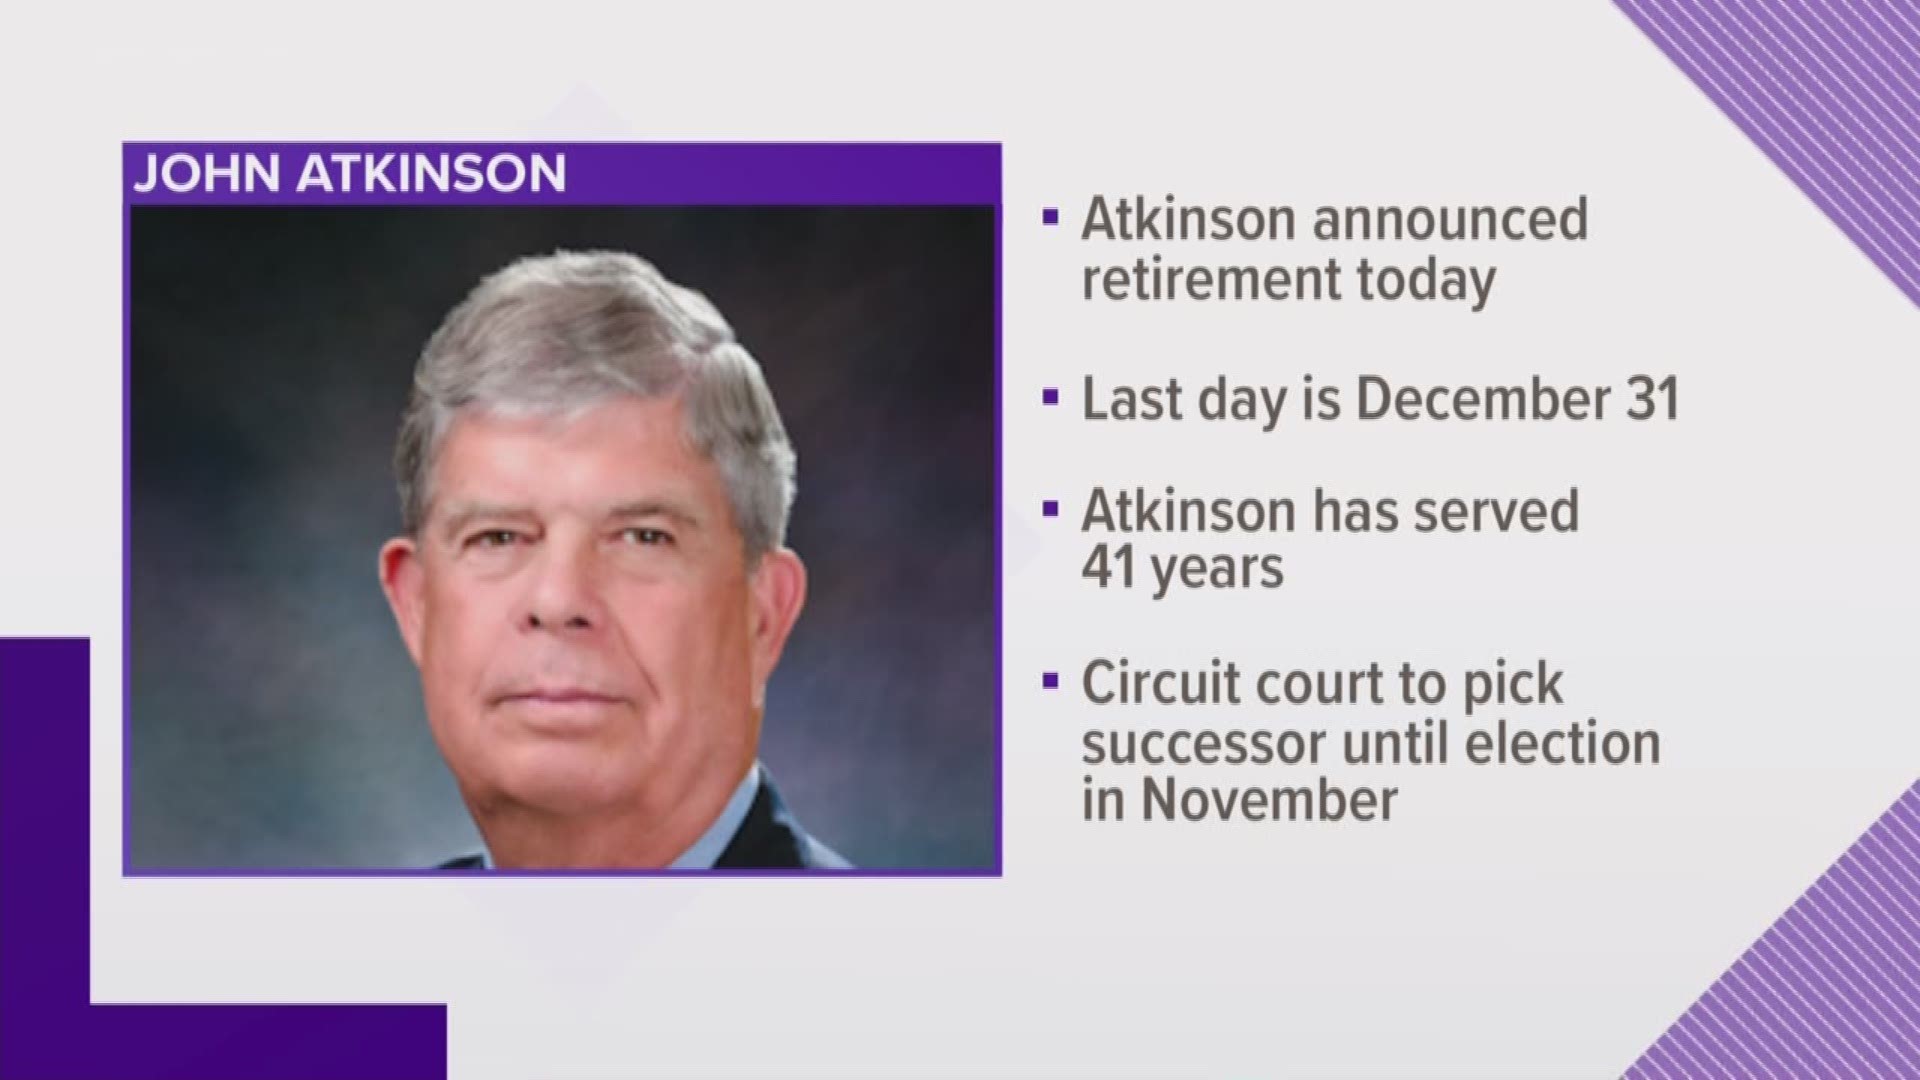 After almost 41 years, John Atkinson is stepping down.